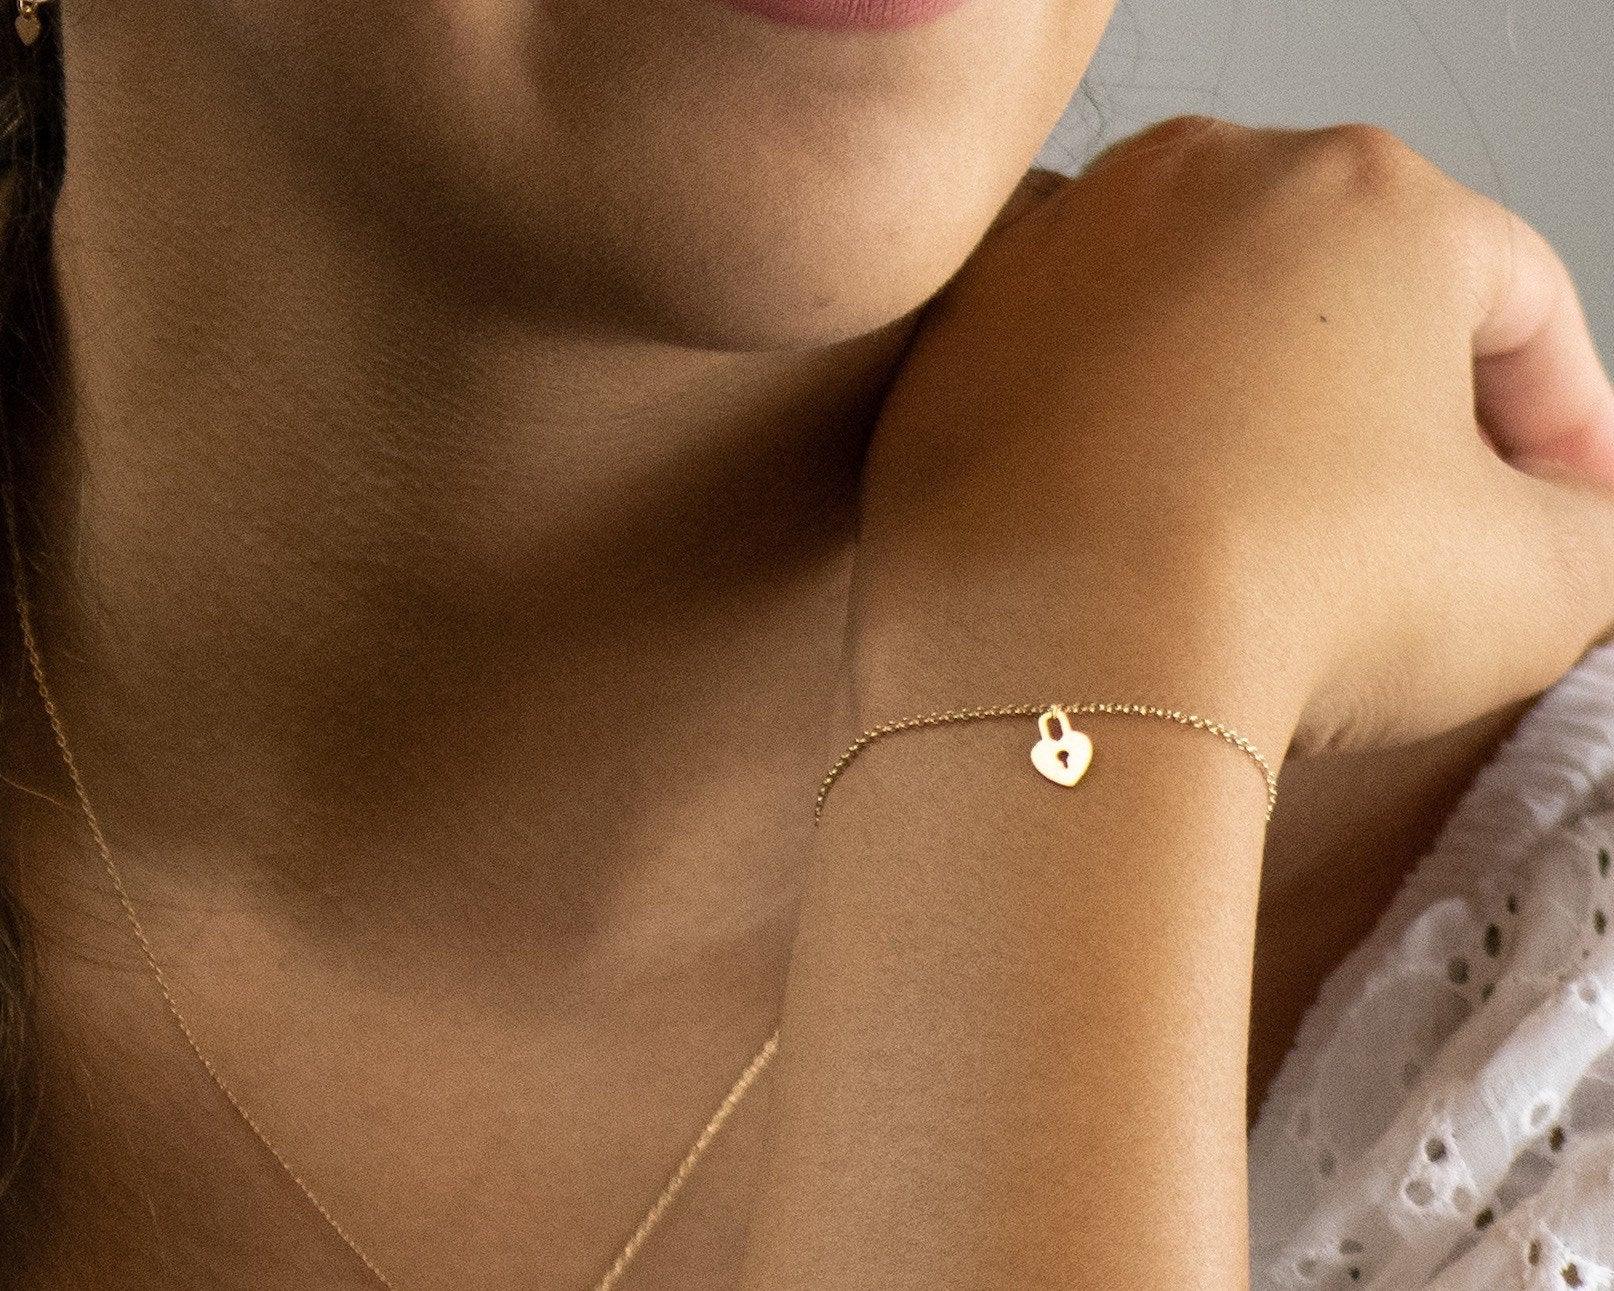 Heart Lock Necklace by Morse and Dainty